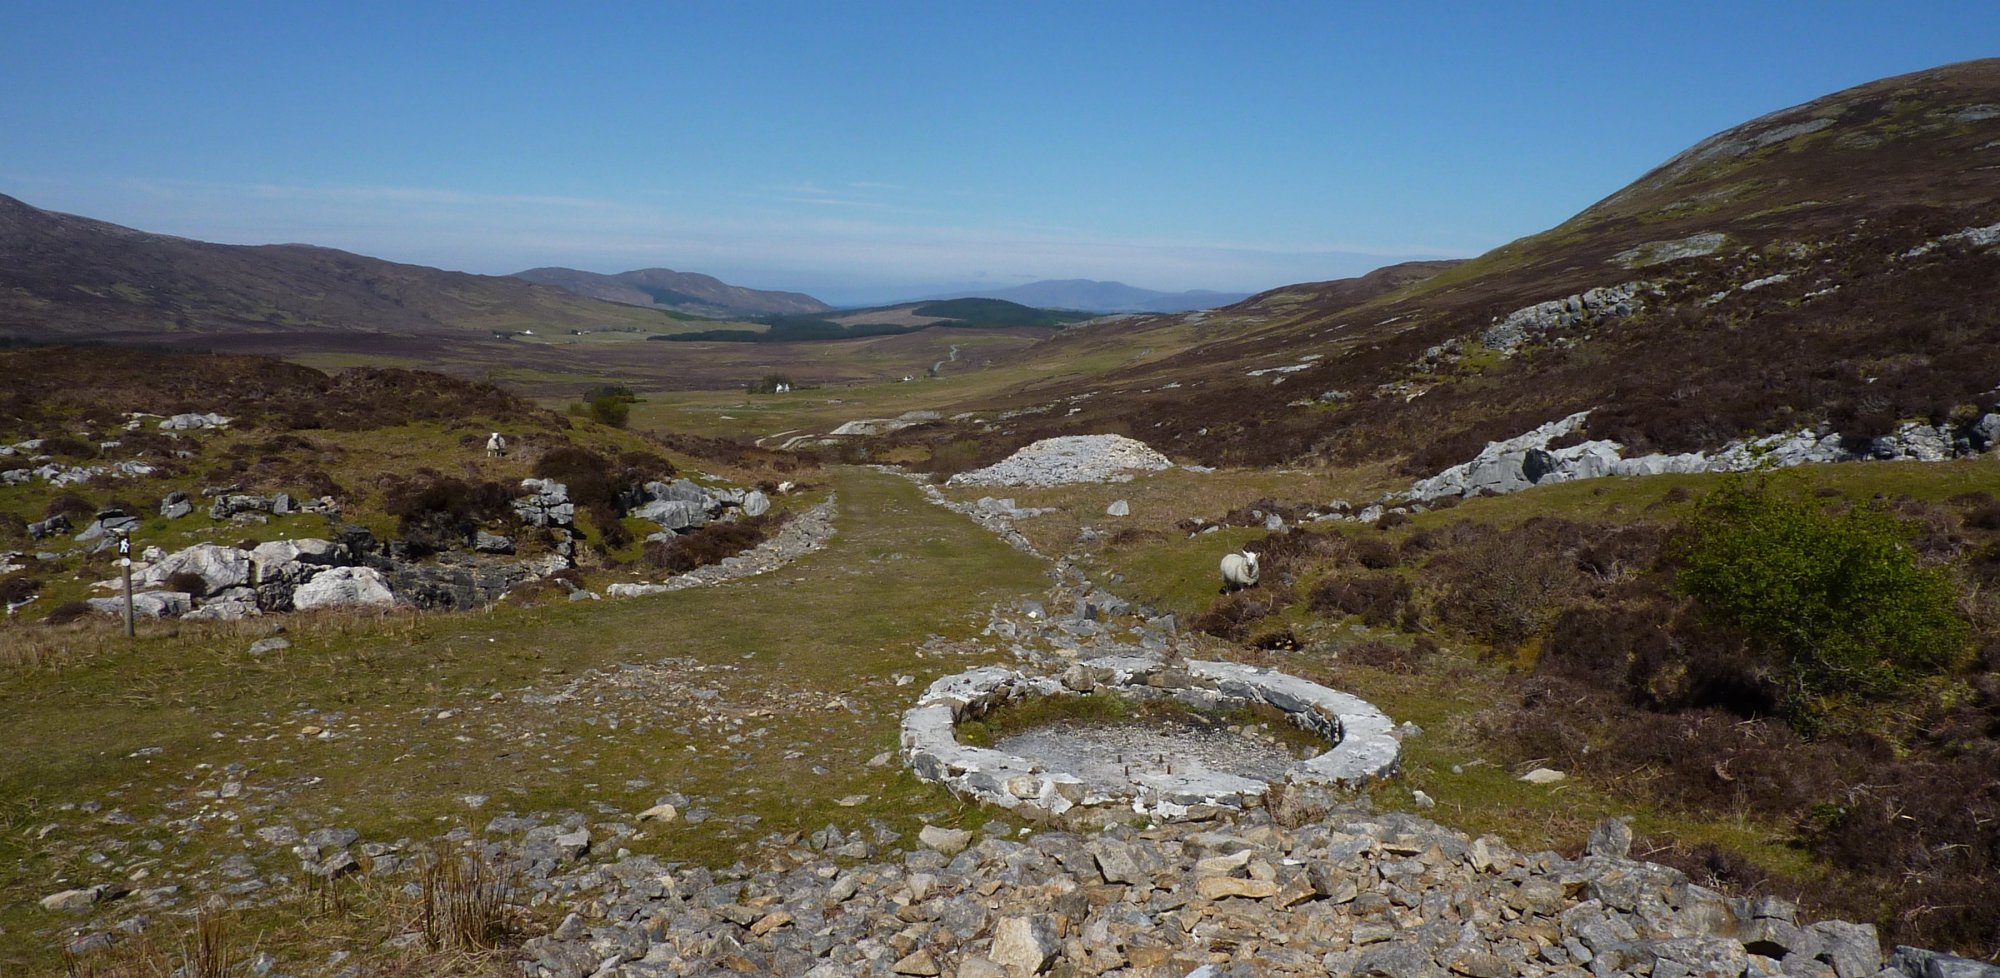 The marble workings in Strath Suardal, the circular structure is what remains of the winding gear